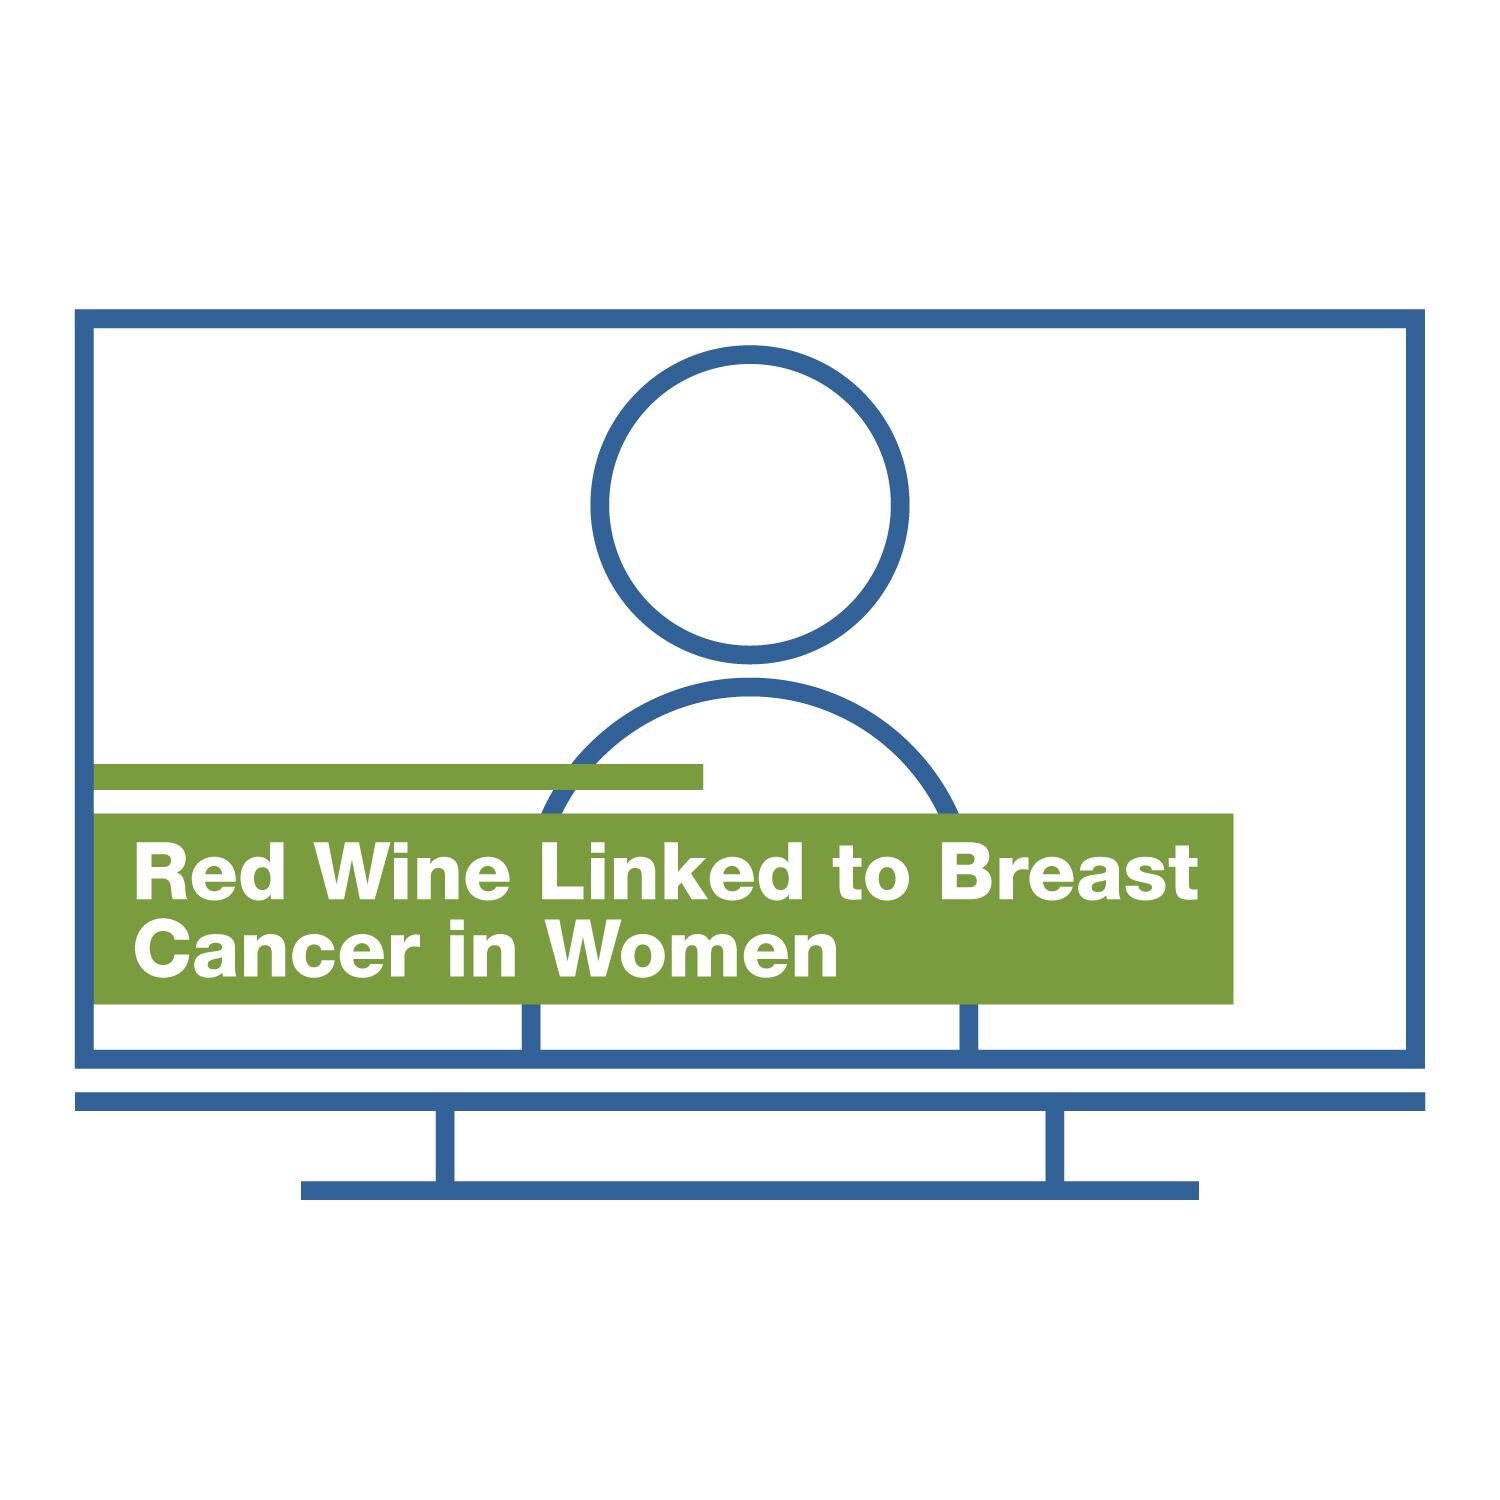 Headline: Red Wine Linked to Breast Cancer in Women